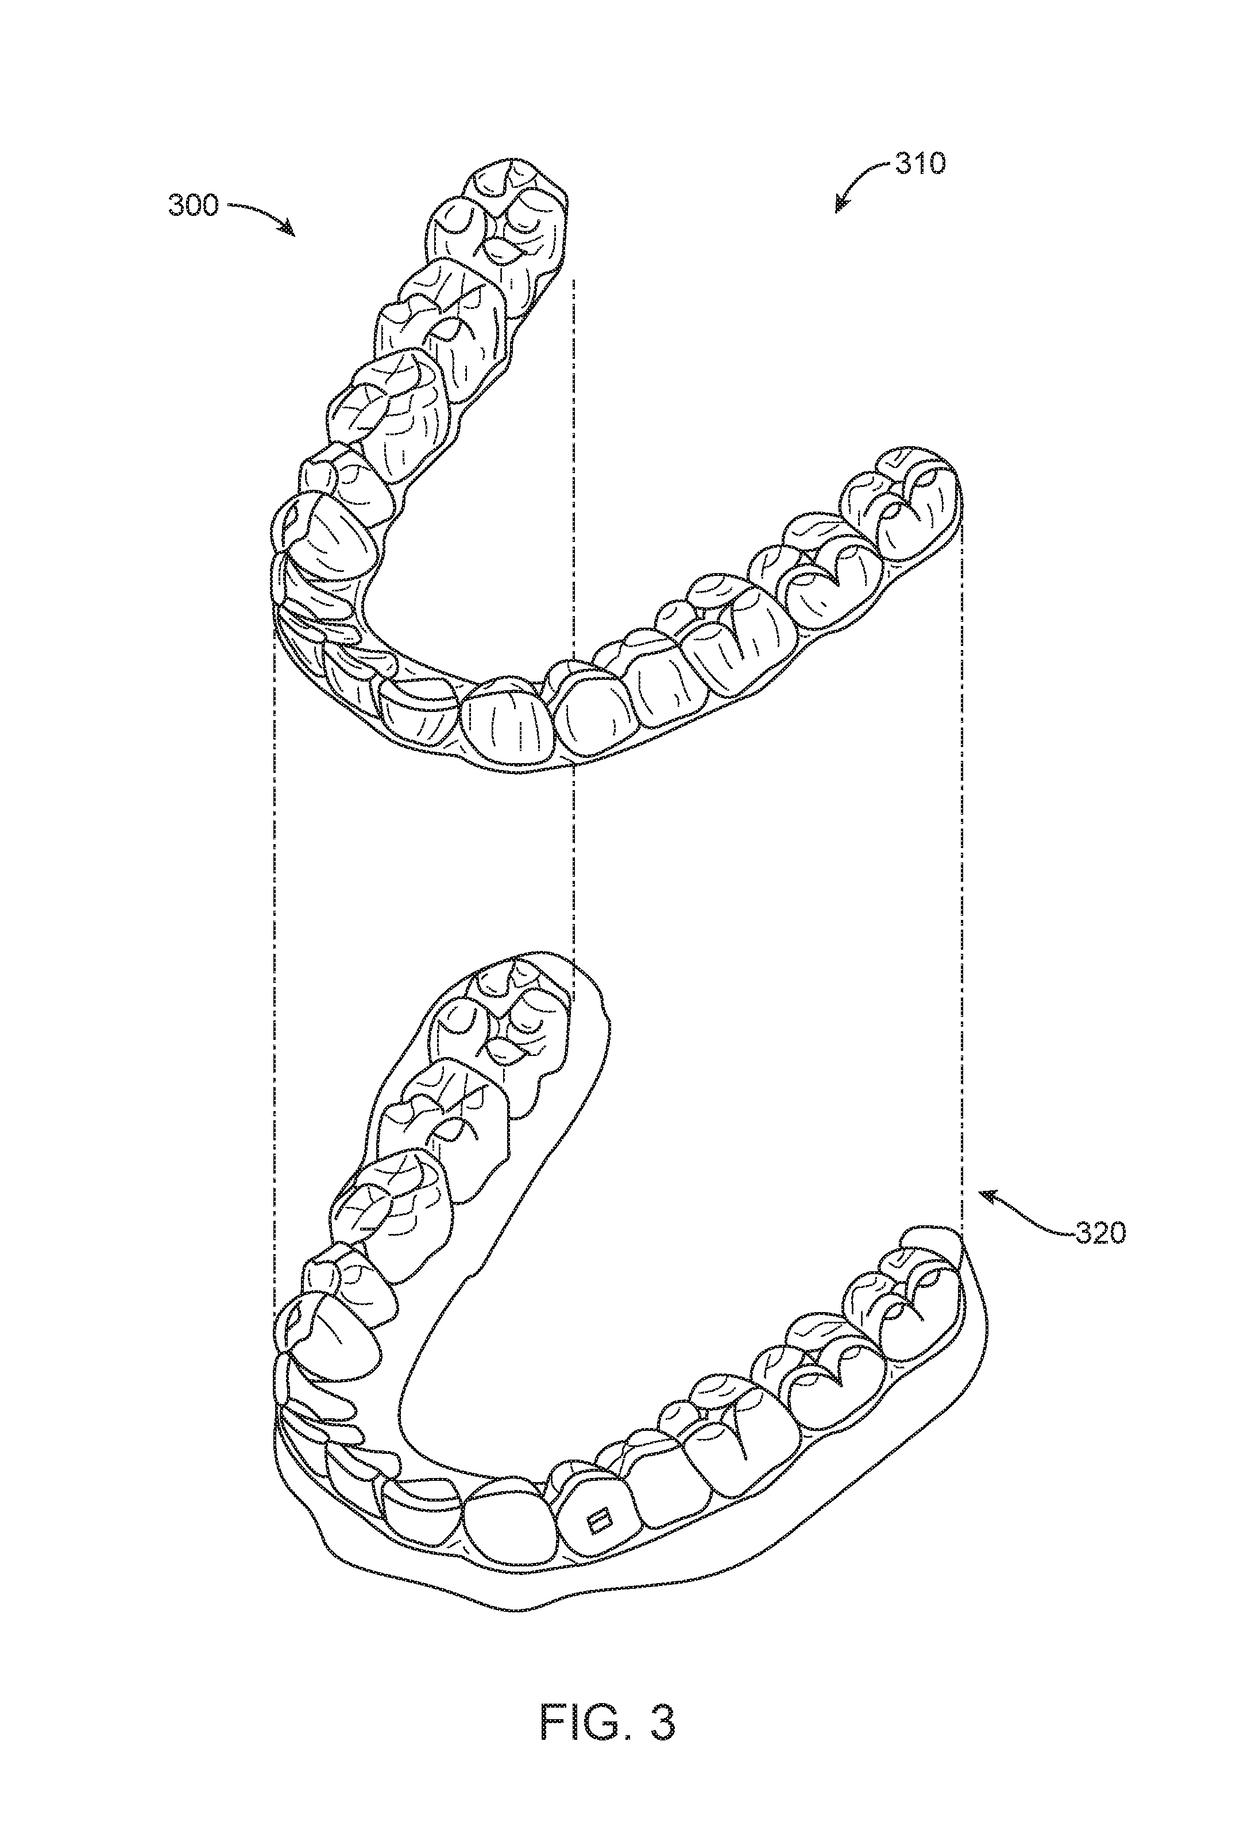 Treatment of temperomandibular joint dysfunction with aligner therapy